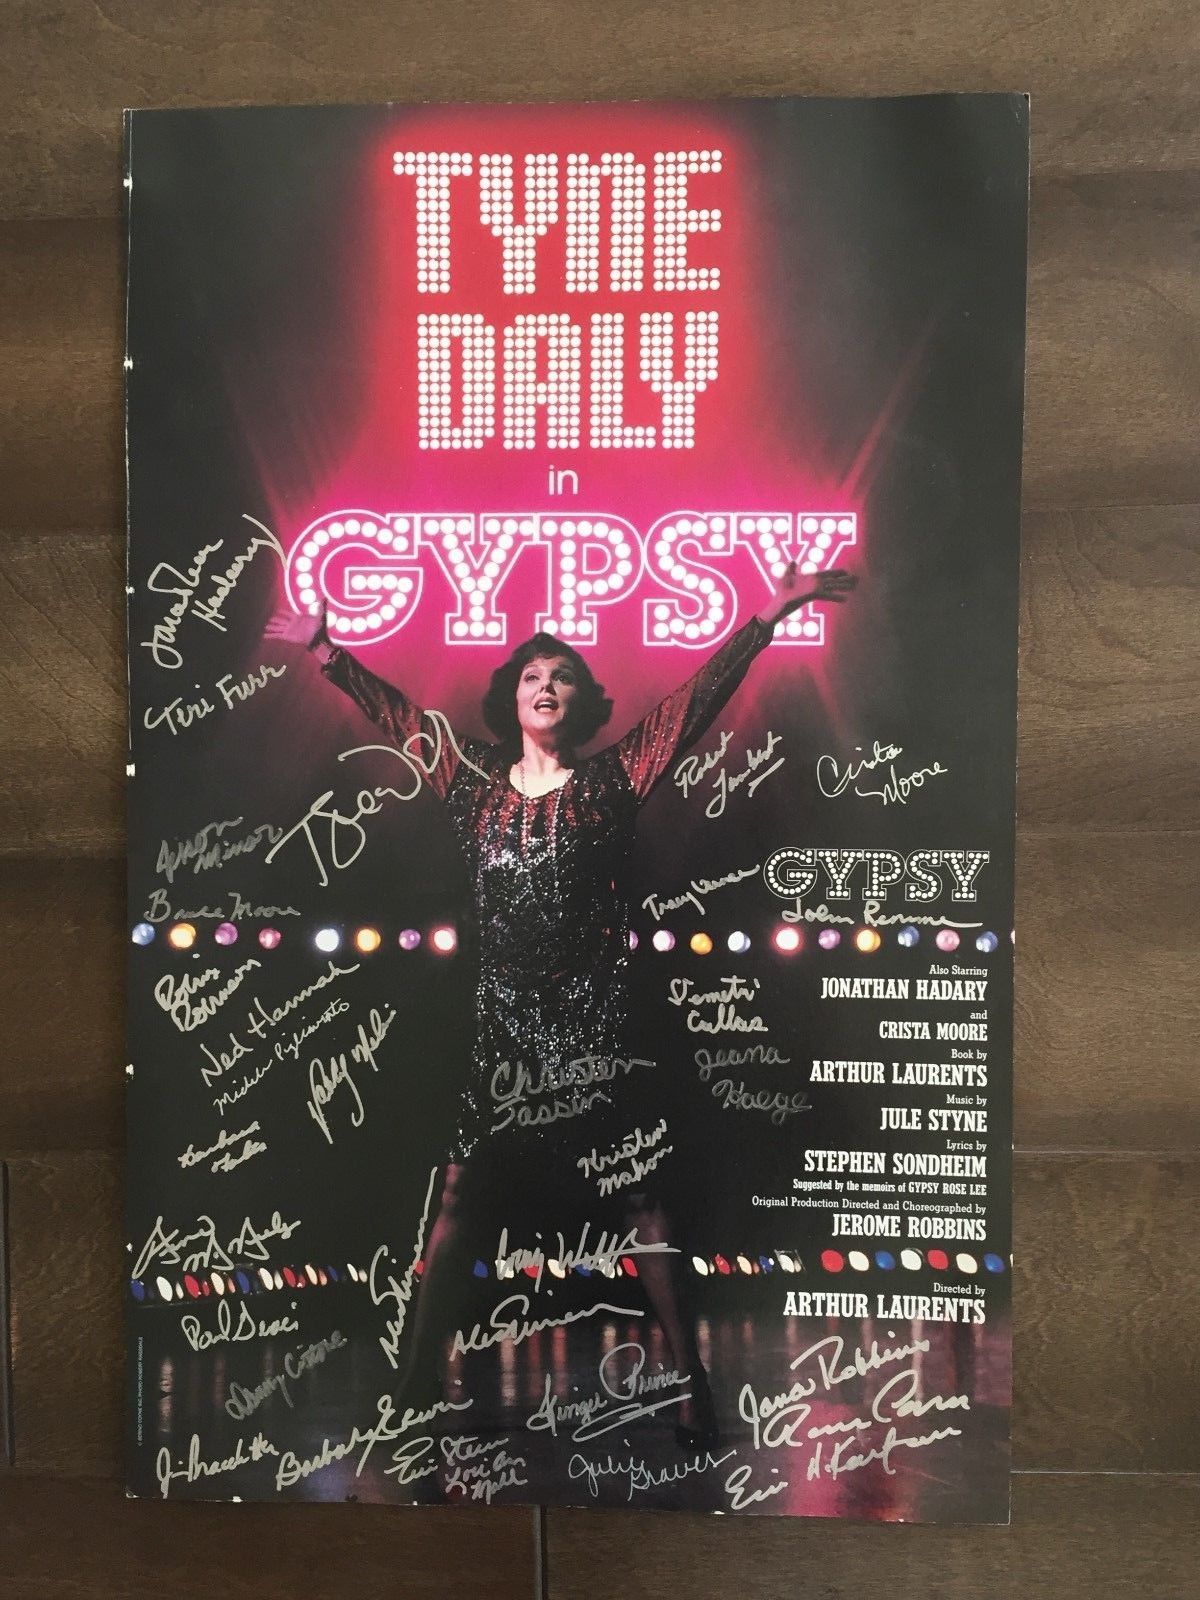 14" X 22" Cast Signed Poster of the show "Gypsy"-Tyne Daly